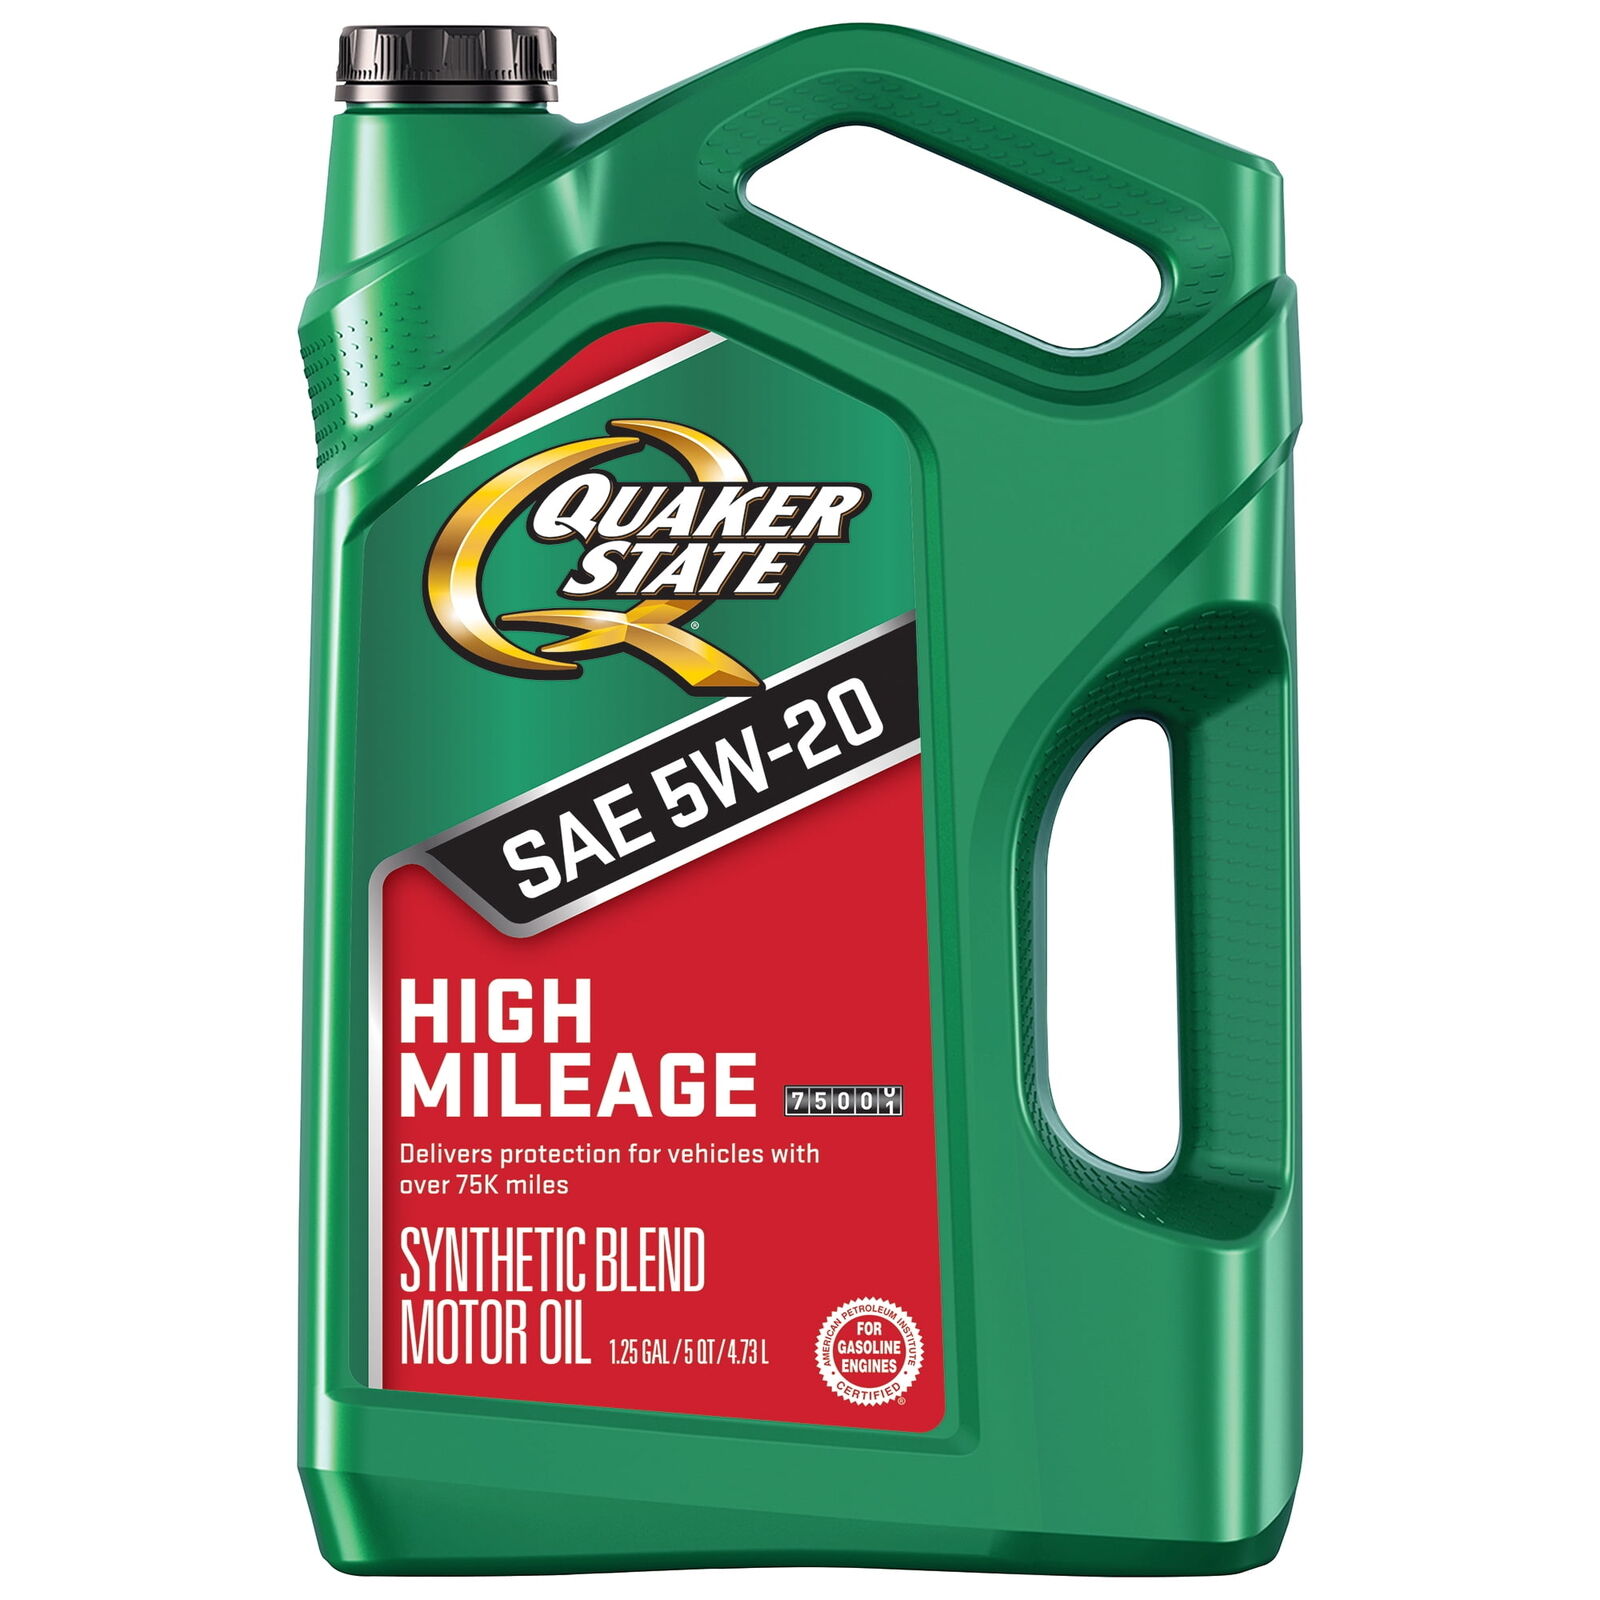 High Mileage 5W-20 Synthetic Blend Motor Oil for Vehicles over 75K Miles,5-Quart